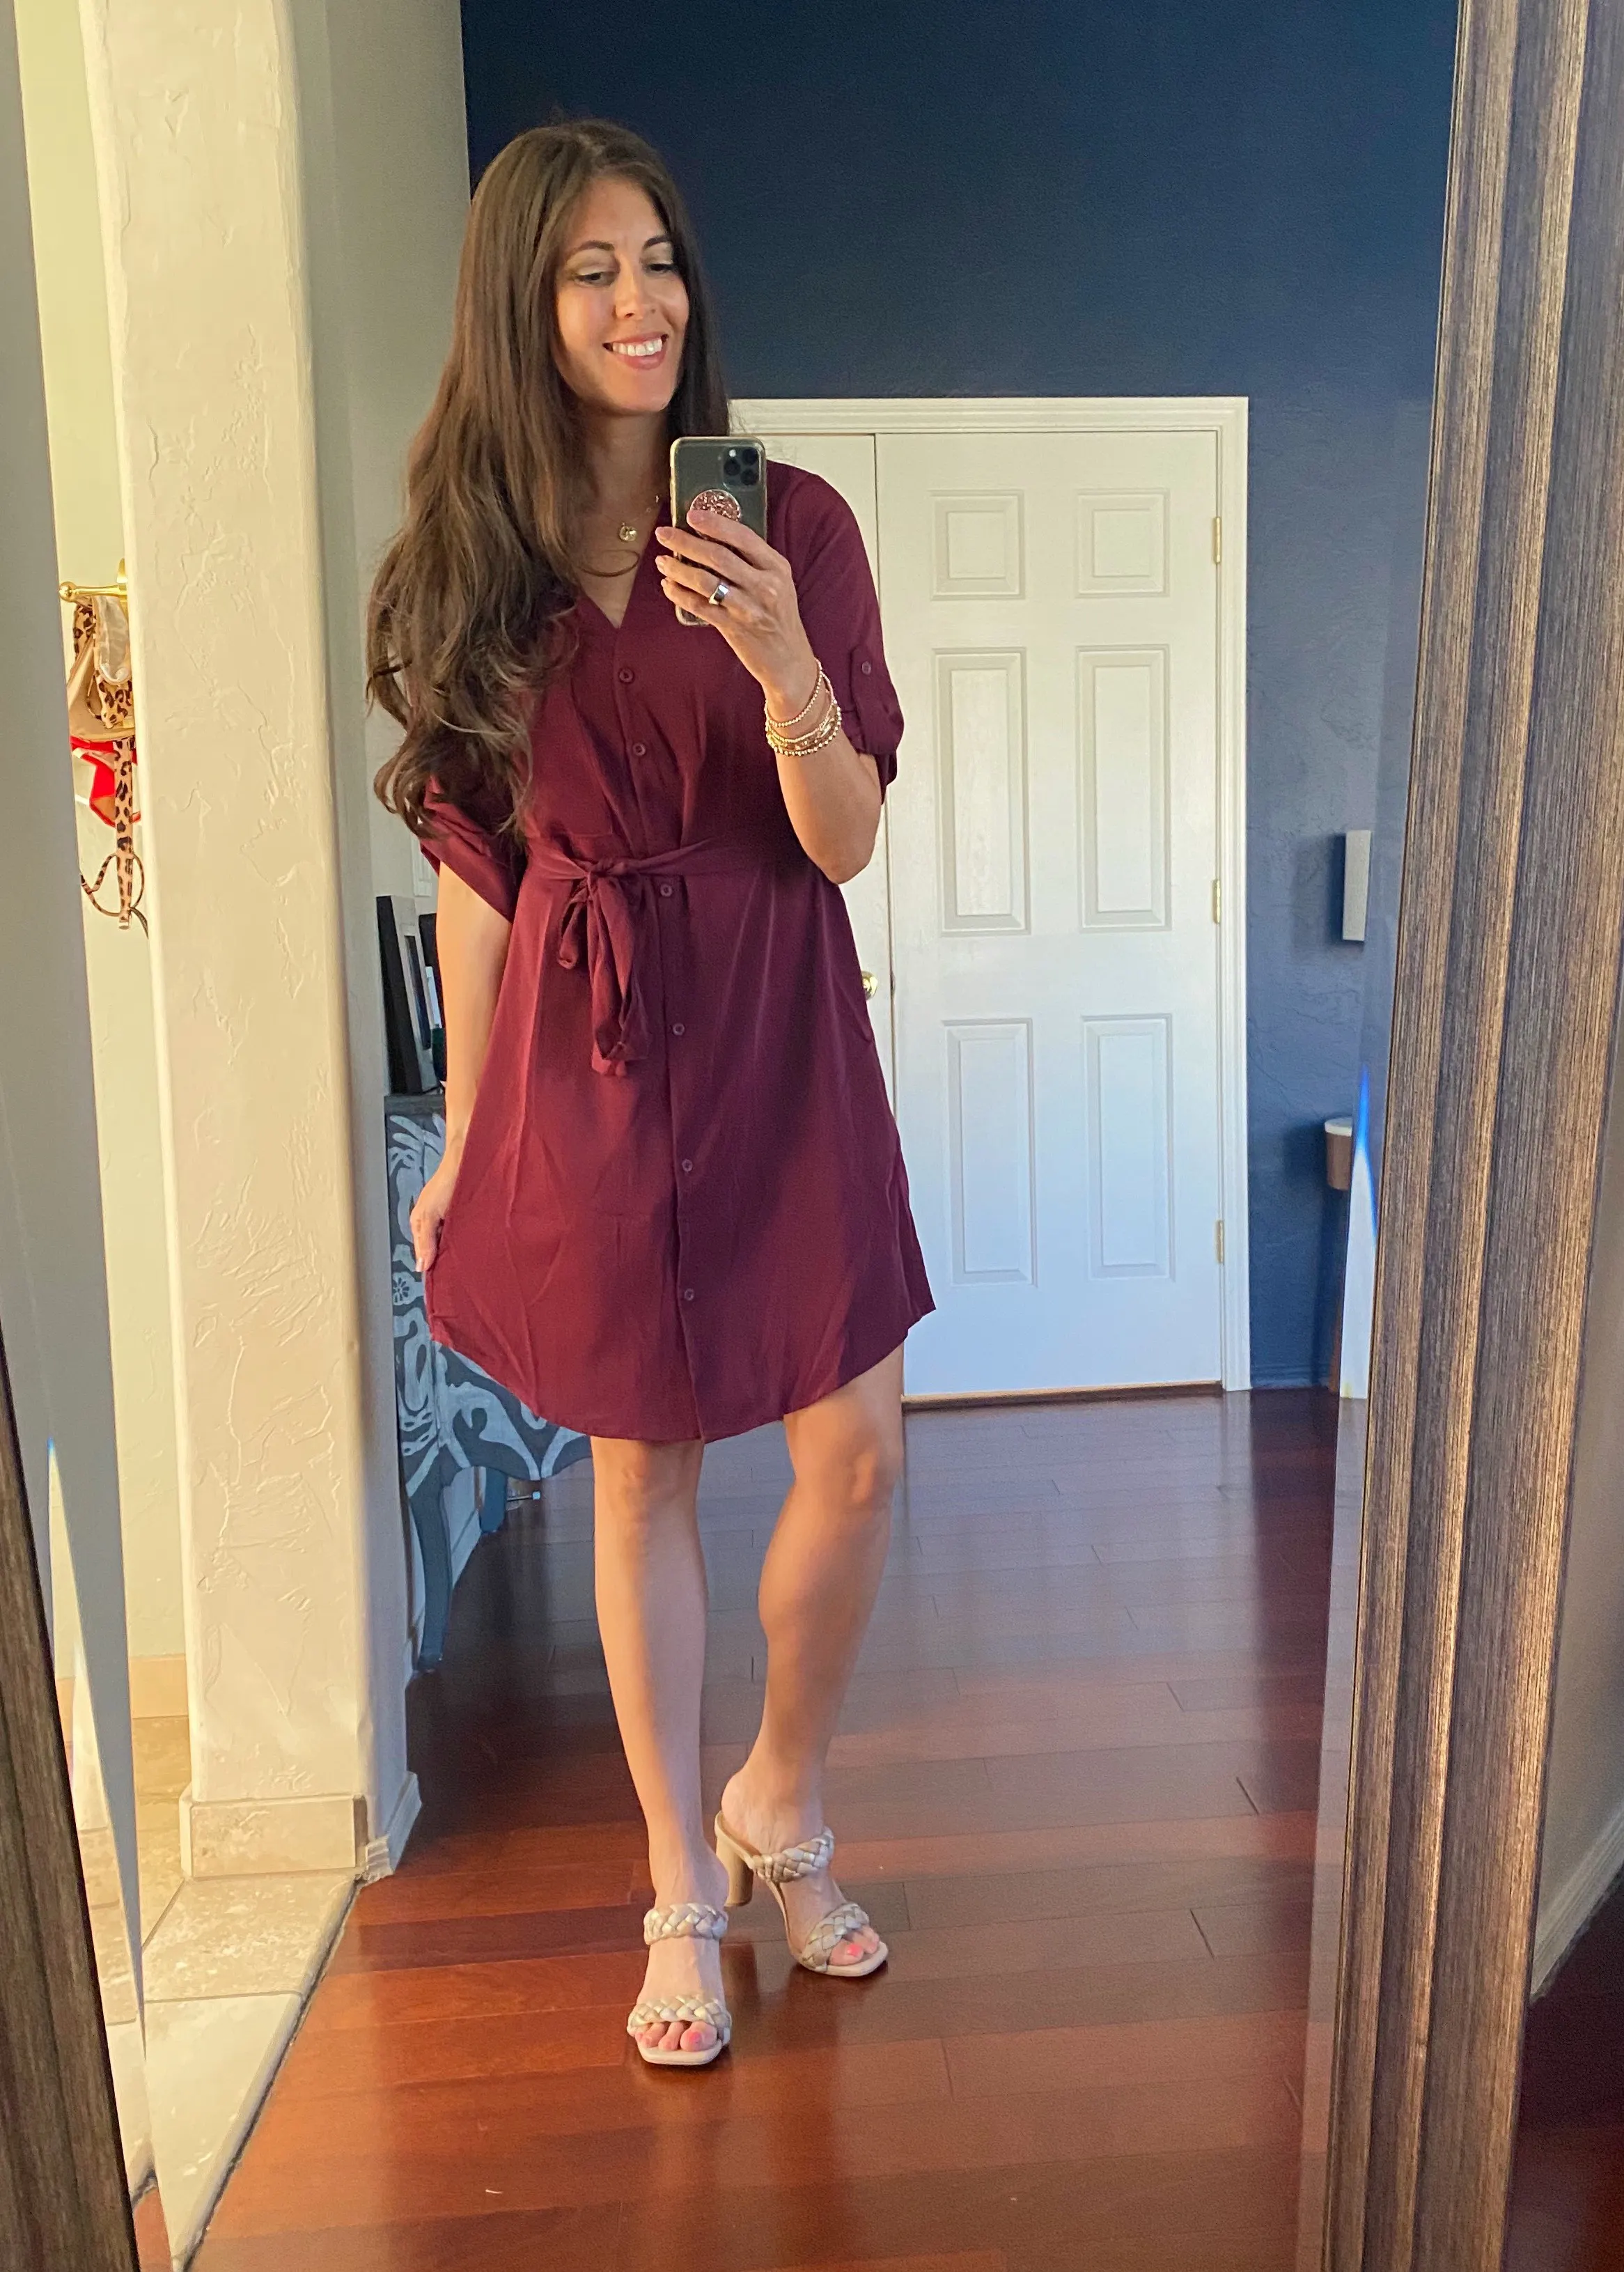 shirtdress for fall | Friday Faves 9.16